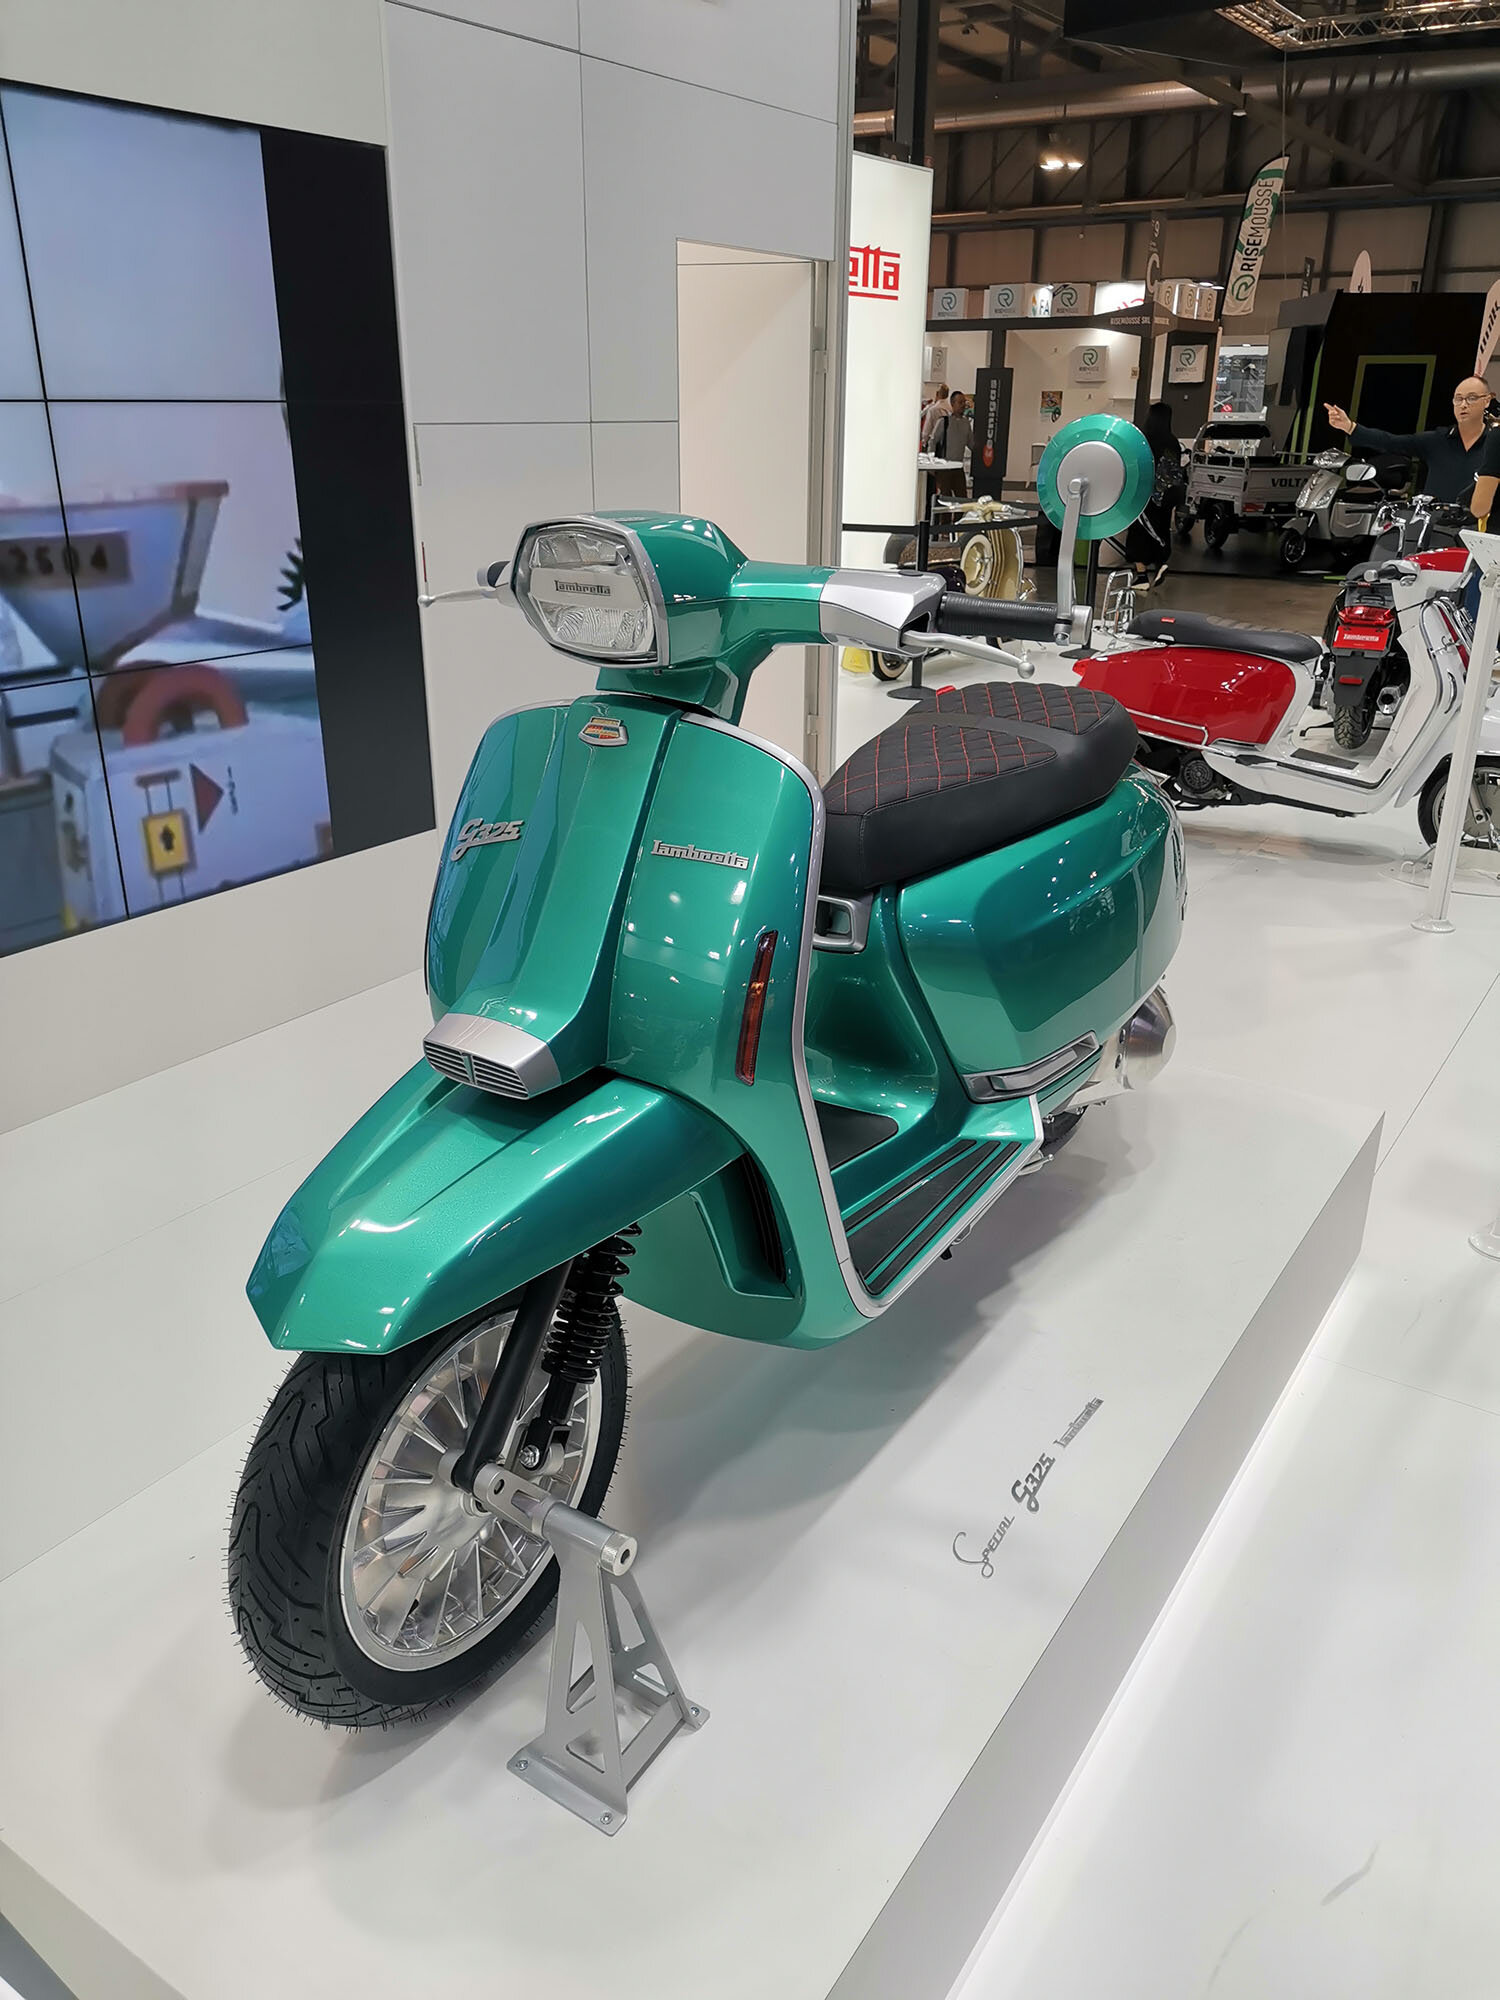 Lambretta to launch high-powered scooters in India